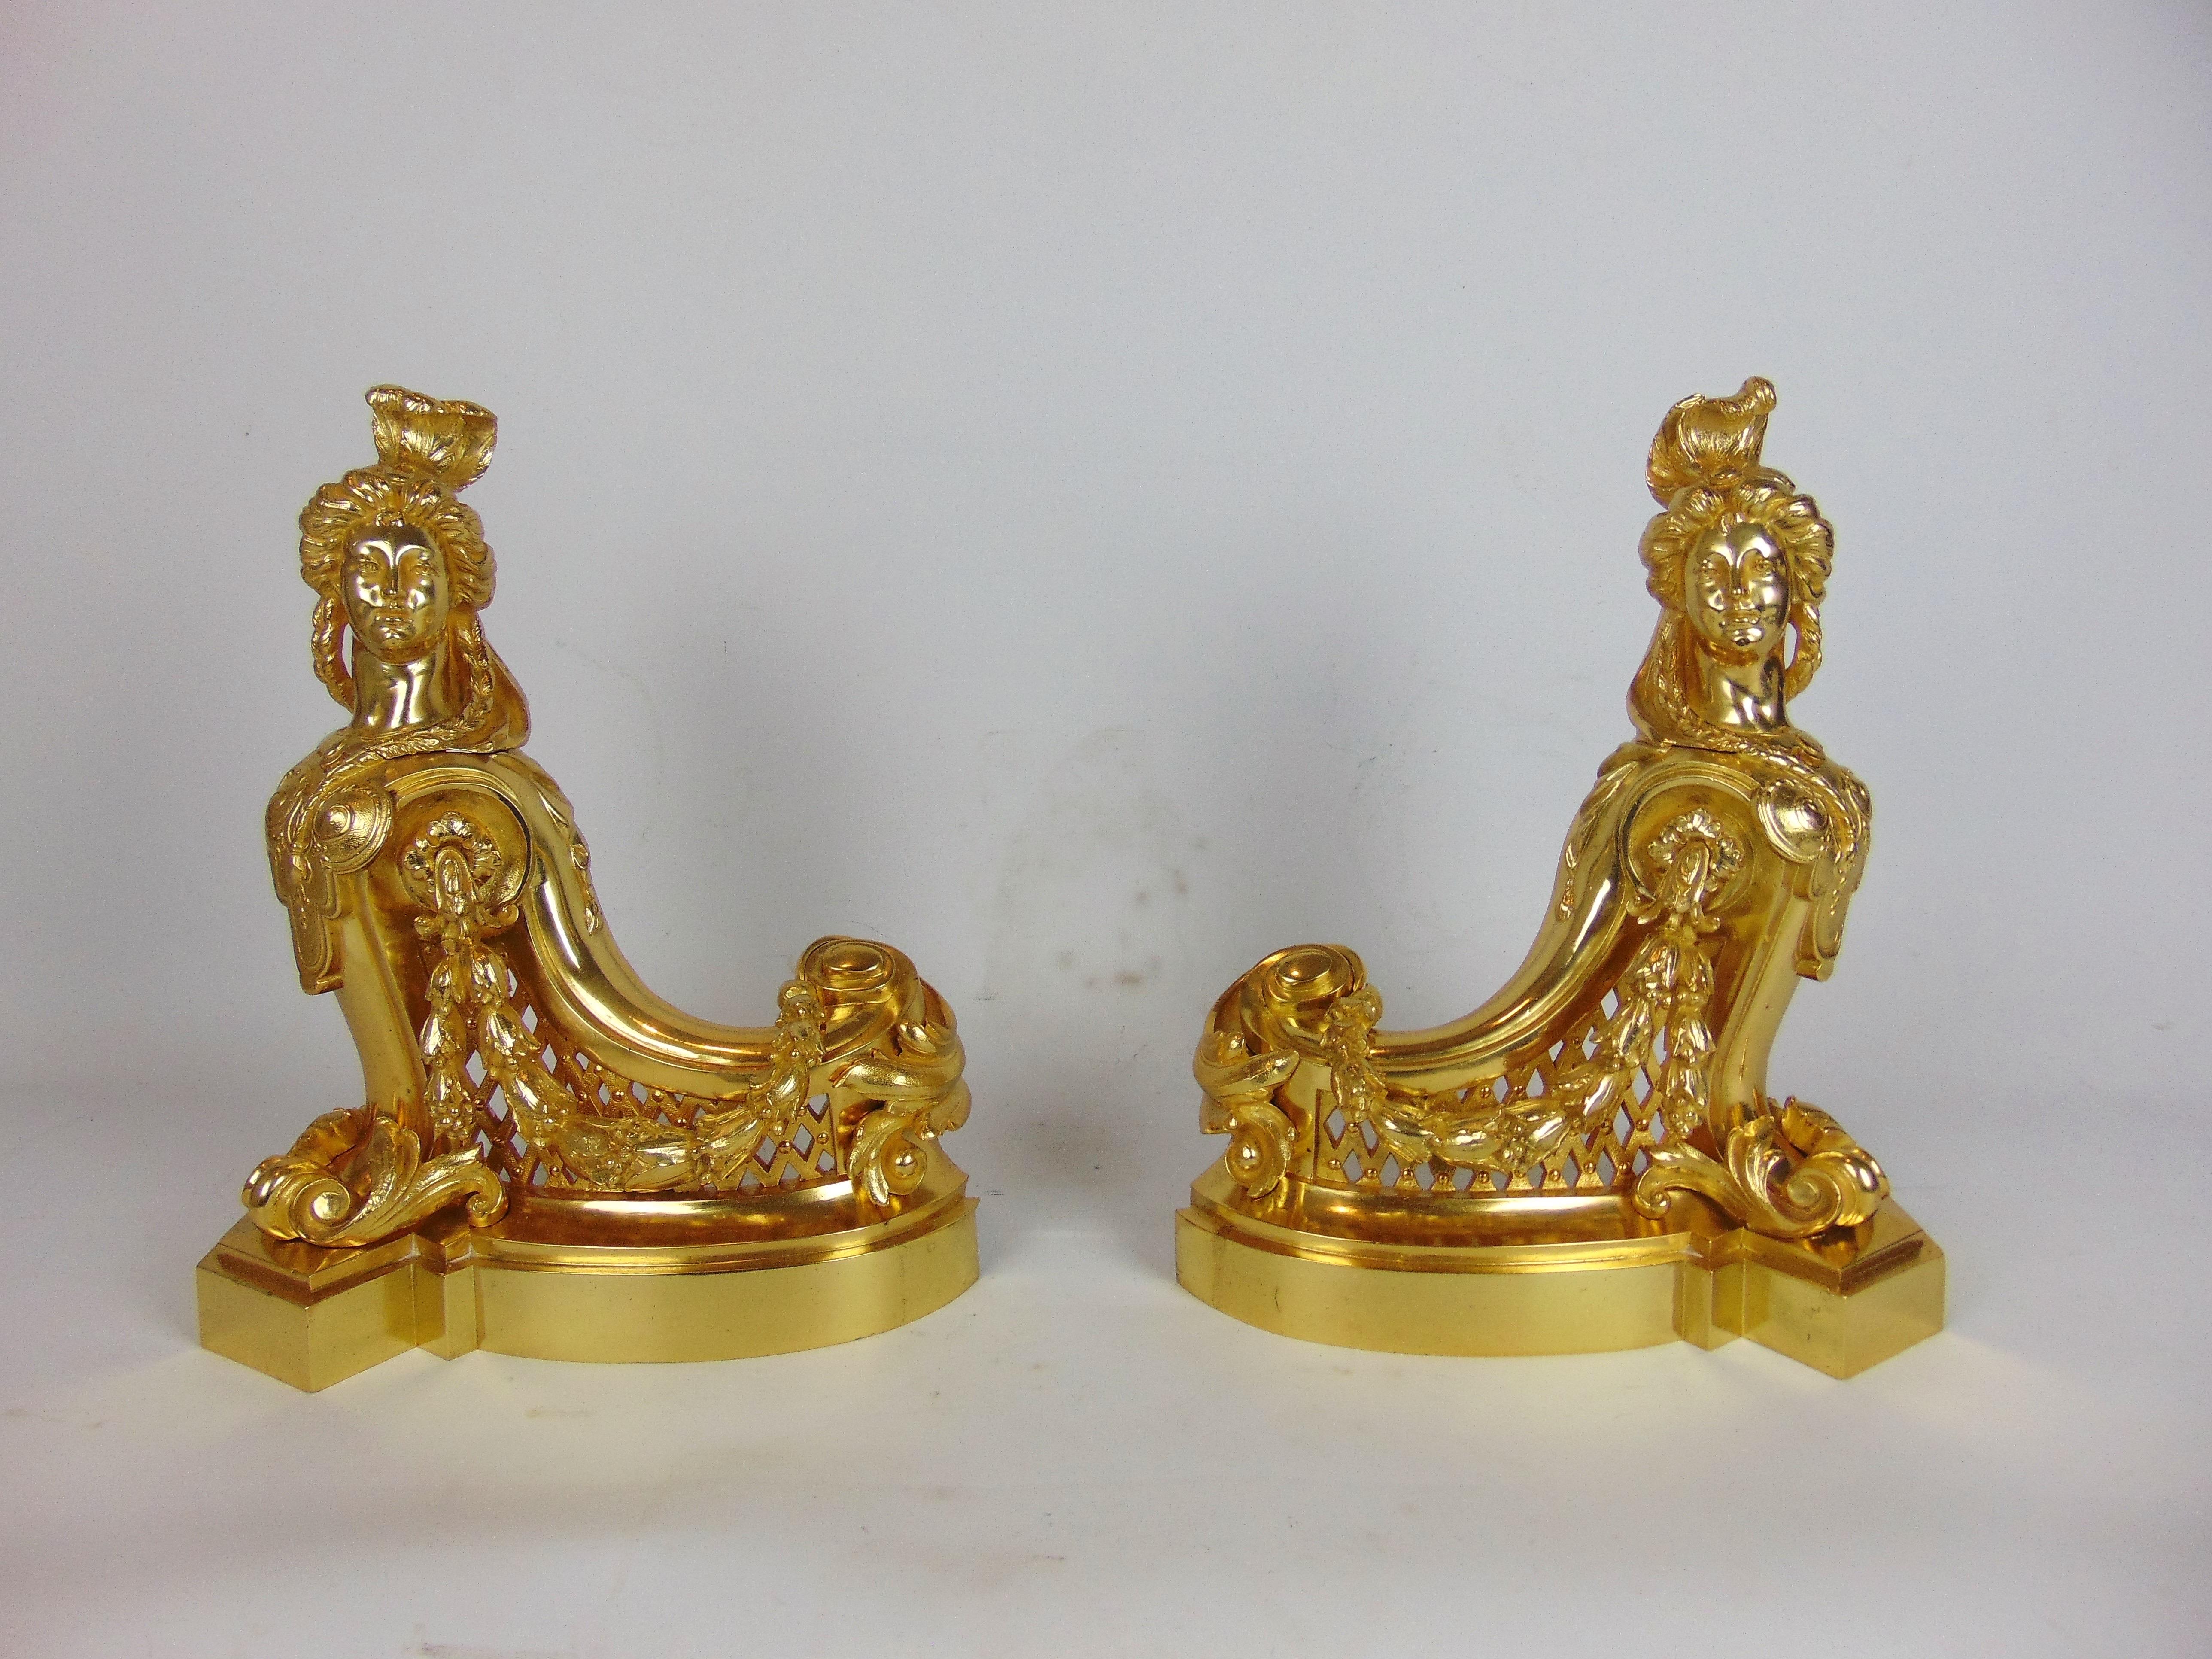 A superb Gilt Bronze Fender high quality casting in the form of twin classical female figures each with feathers to their heads as their platted hair is draped across dressed torso which sweeps down to a central pieced fret work central bar , can be